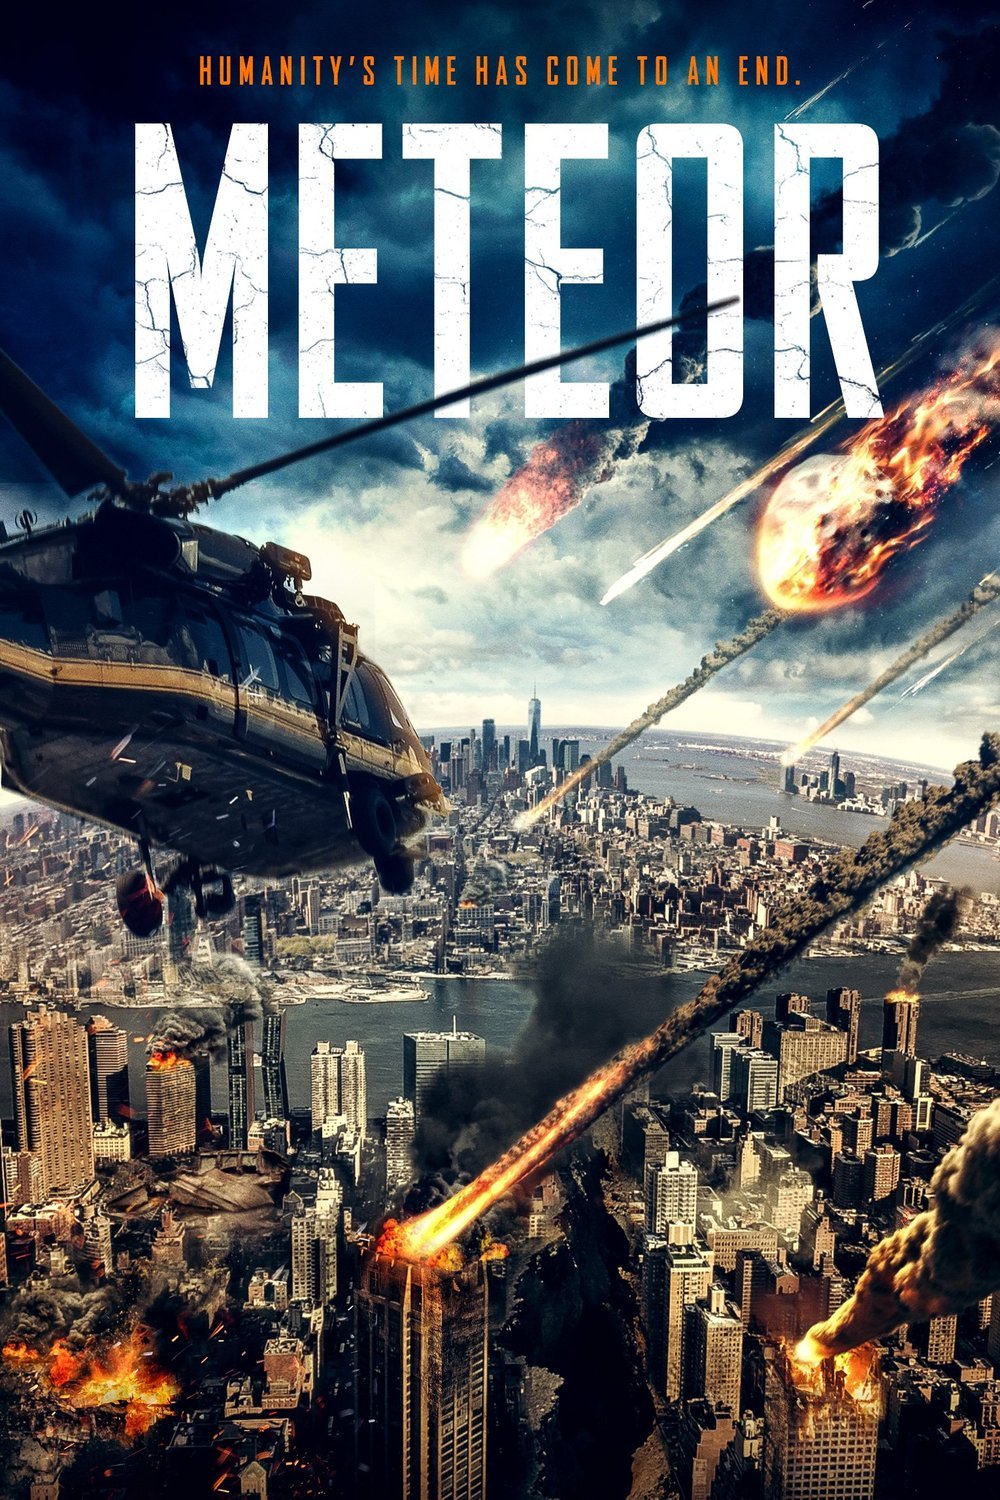 Poster of the movie Meteor